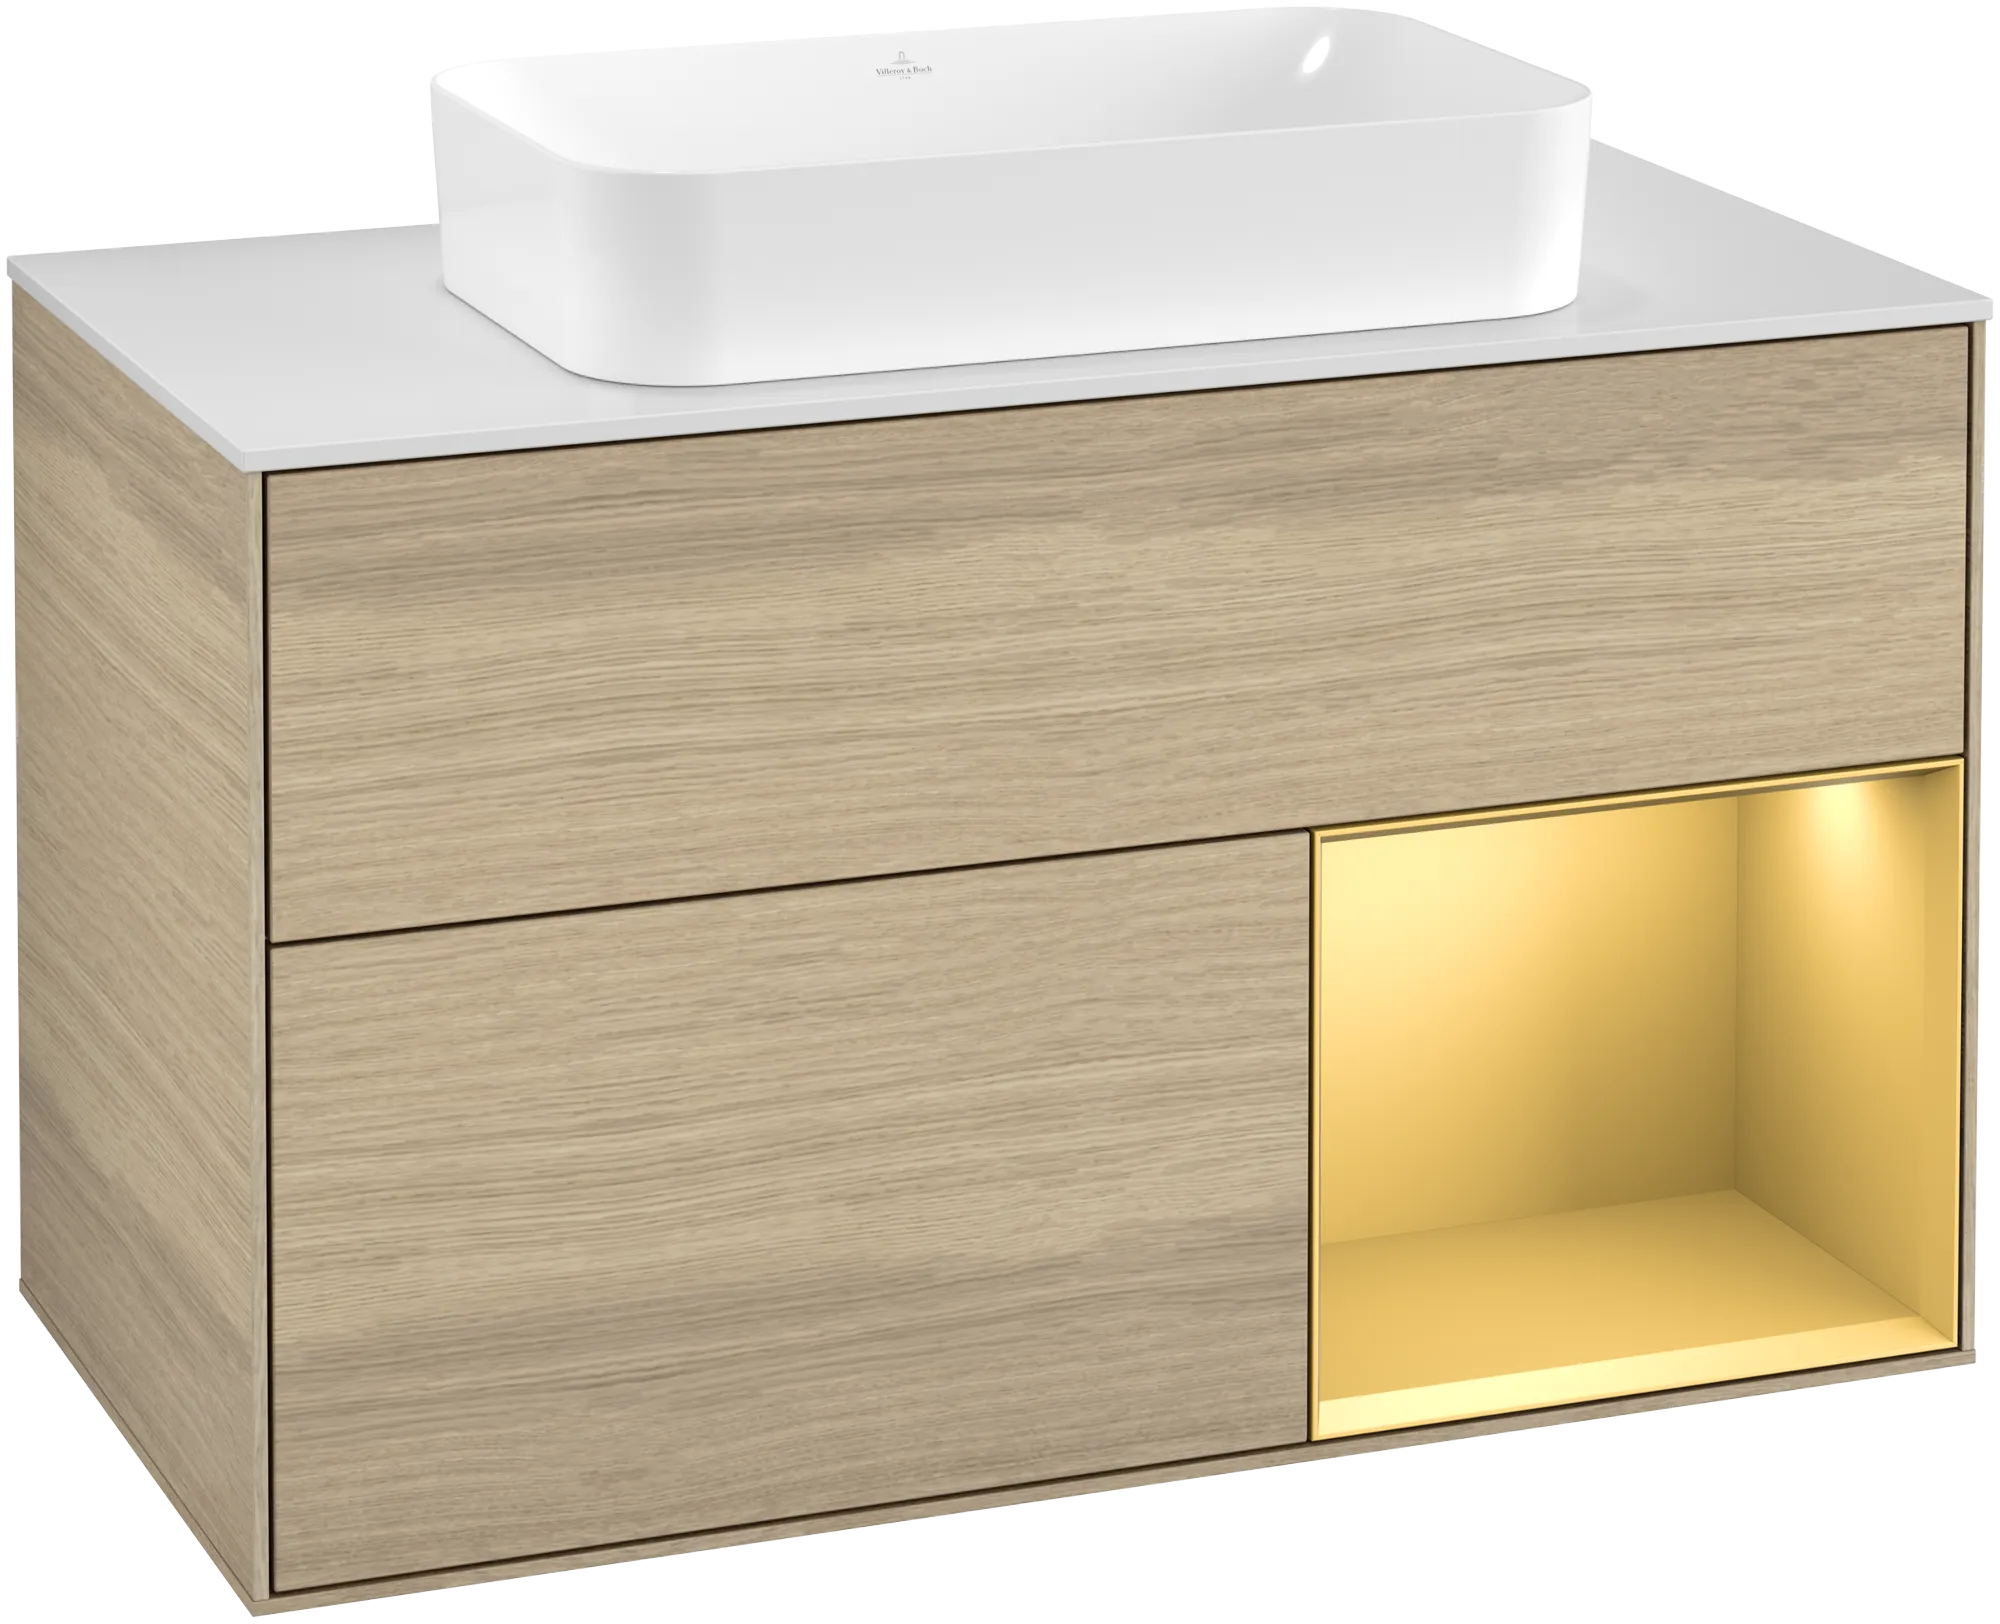 Picture of VILLEROY BOCH Finion Vanity unit, with lighting, 2 pull-out compartments, 1000 x 603 x 501 mm, Oak Veneer / Gold Matt Lacquer / Glass White Matt #G251HFPC